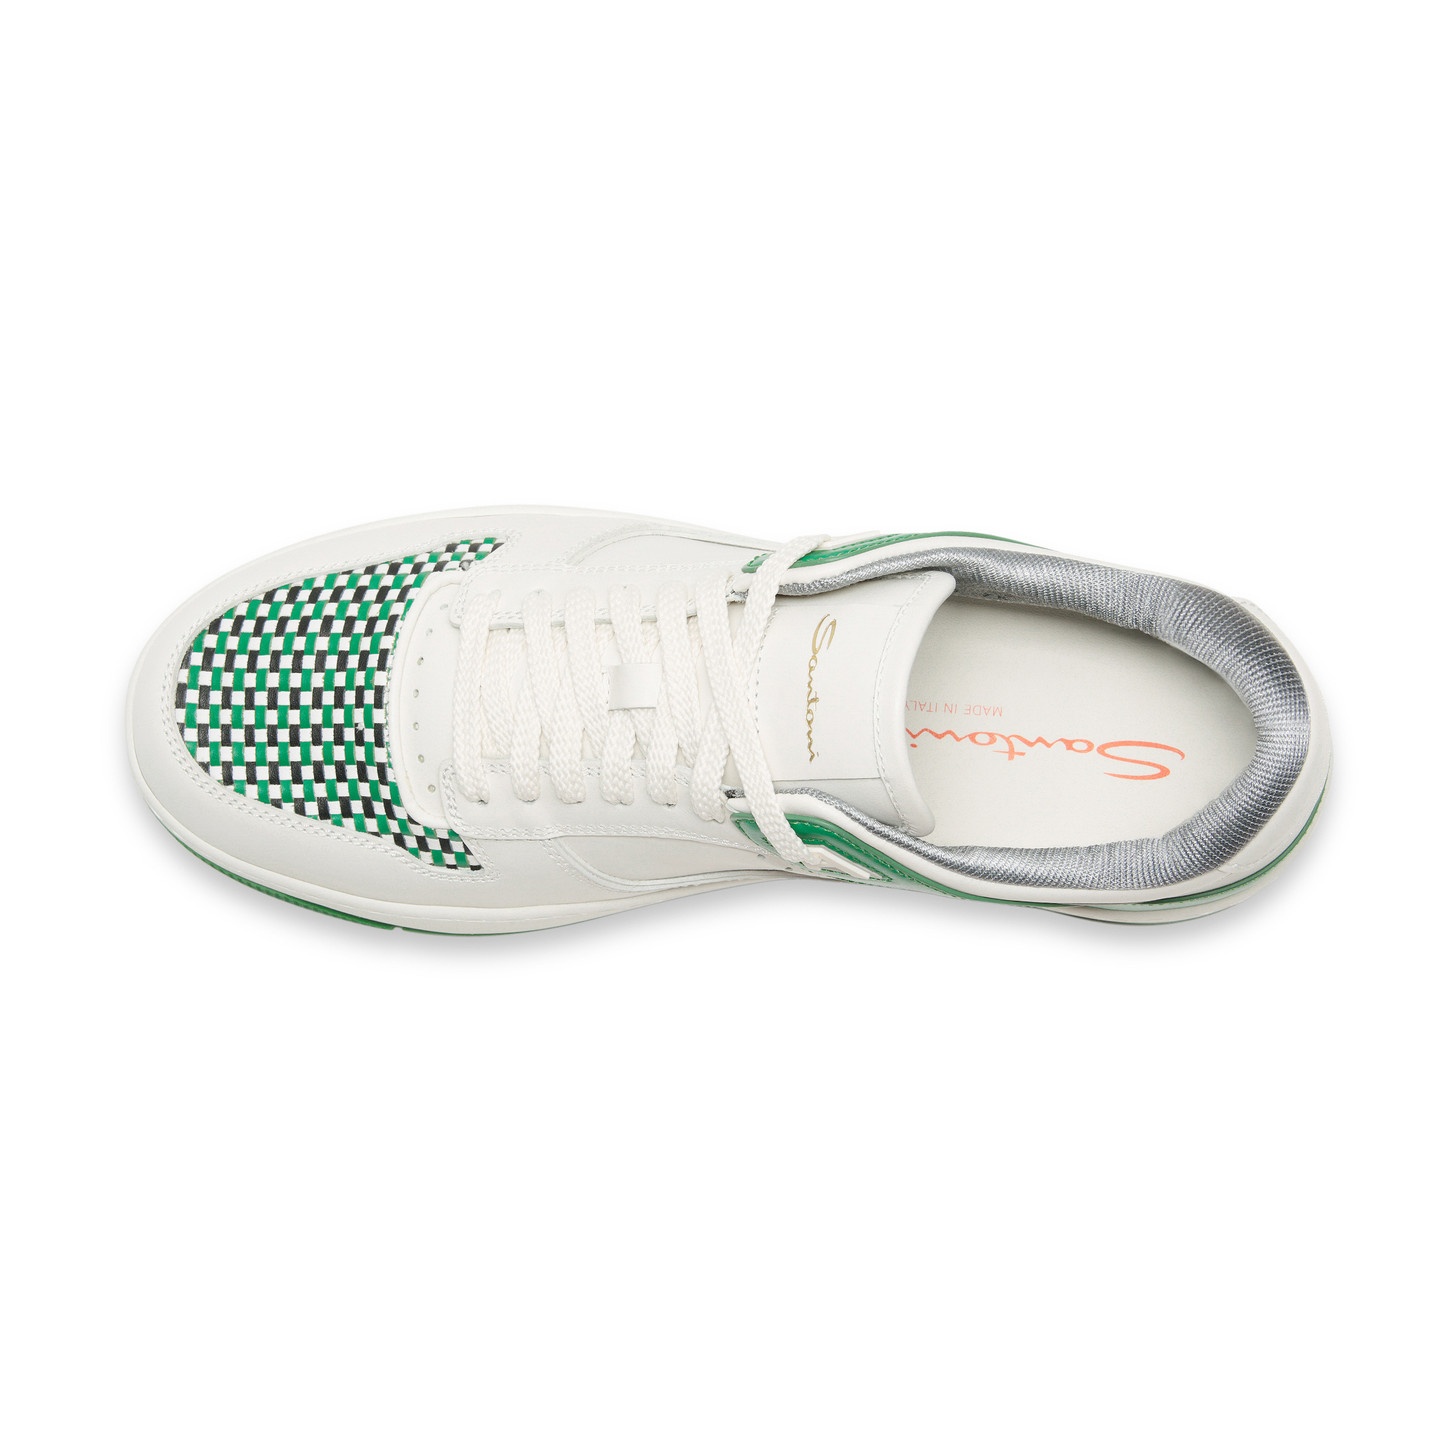 Men's white and green leather Sneak-Air sneaker - 5